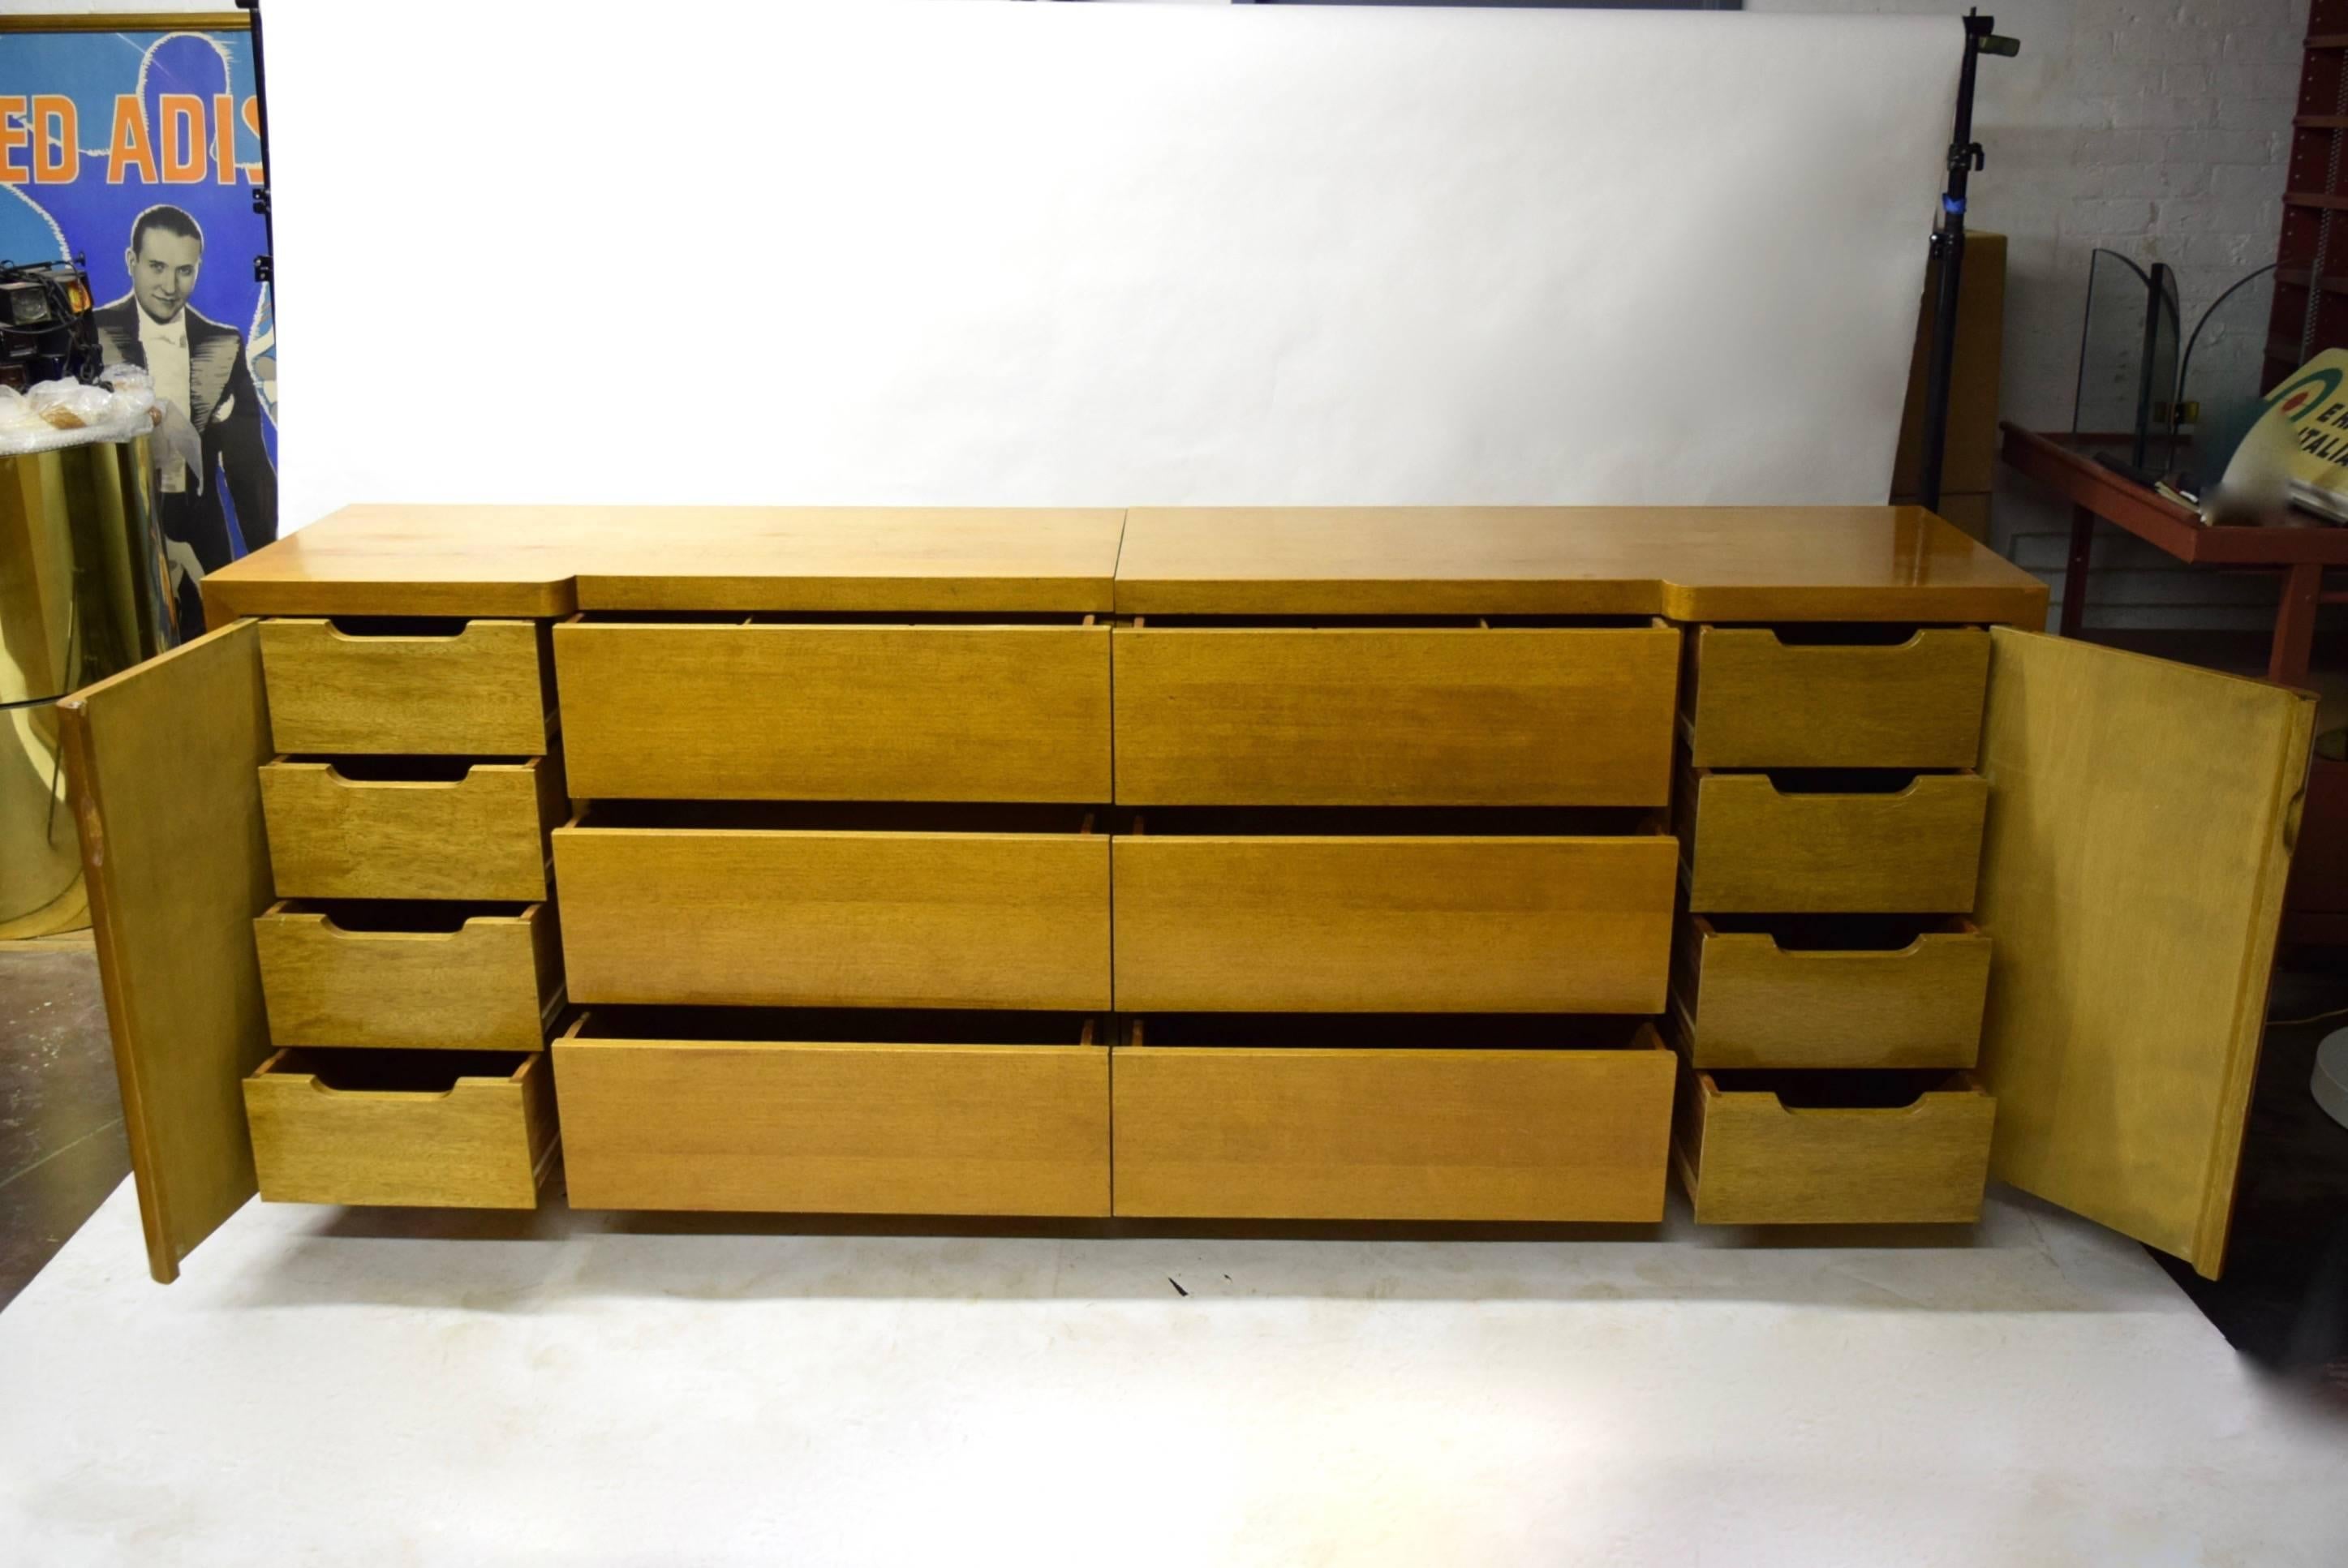 *SPRING SALE*
A refinished, vintage modern pair of dressers of very good quality in cherrywood. The chest is split in the center and finished on all sides allowing it to be used individually or placed together at either end. Each half has three